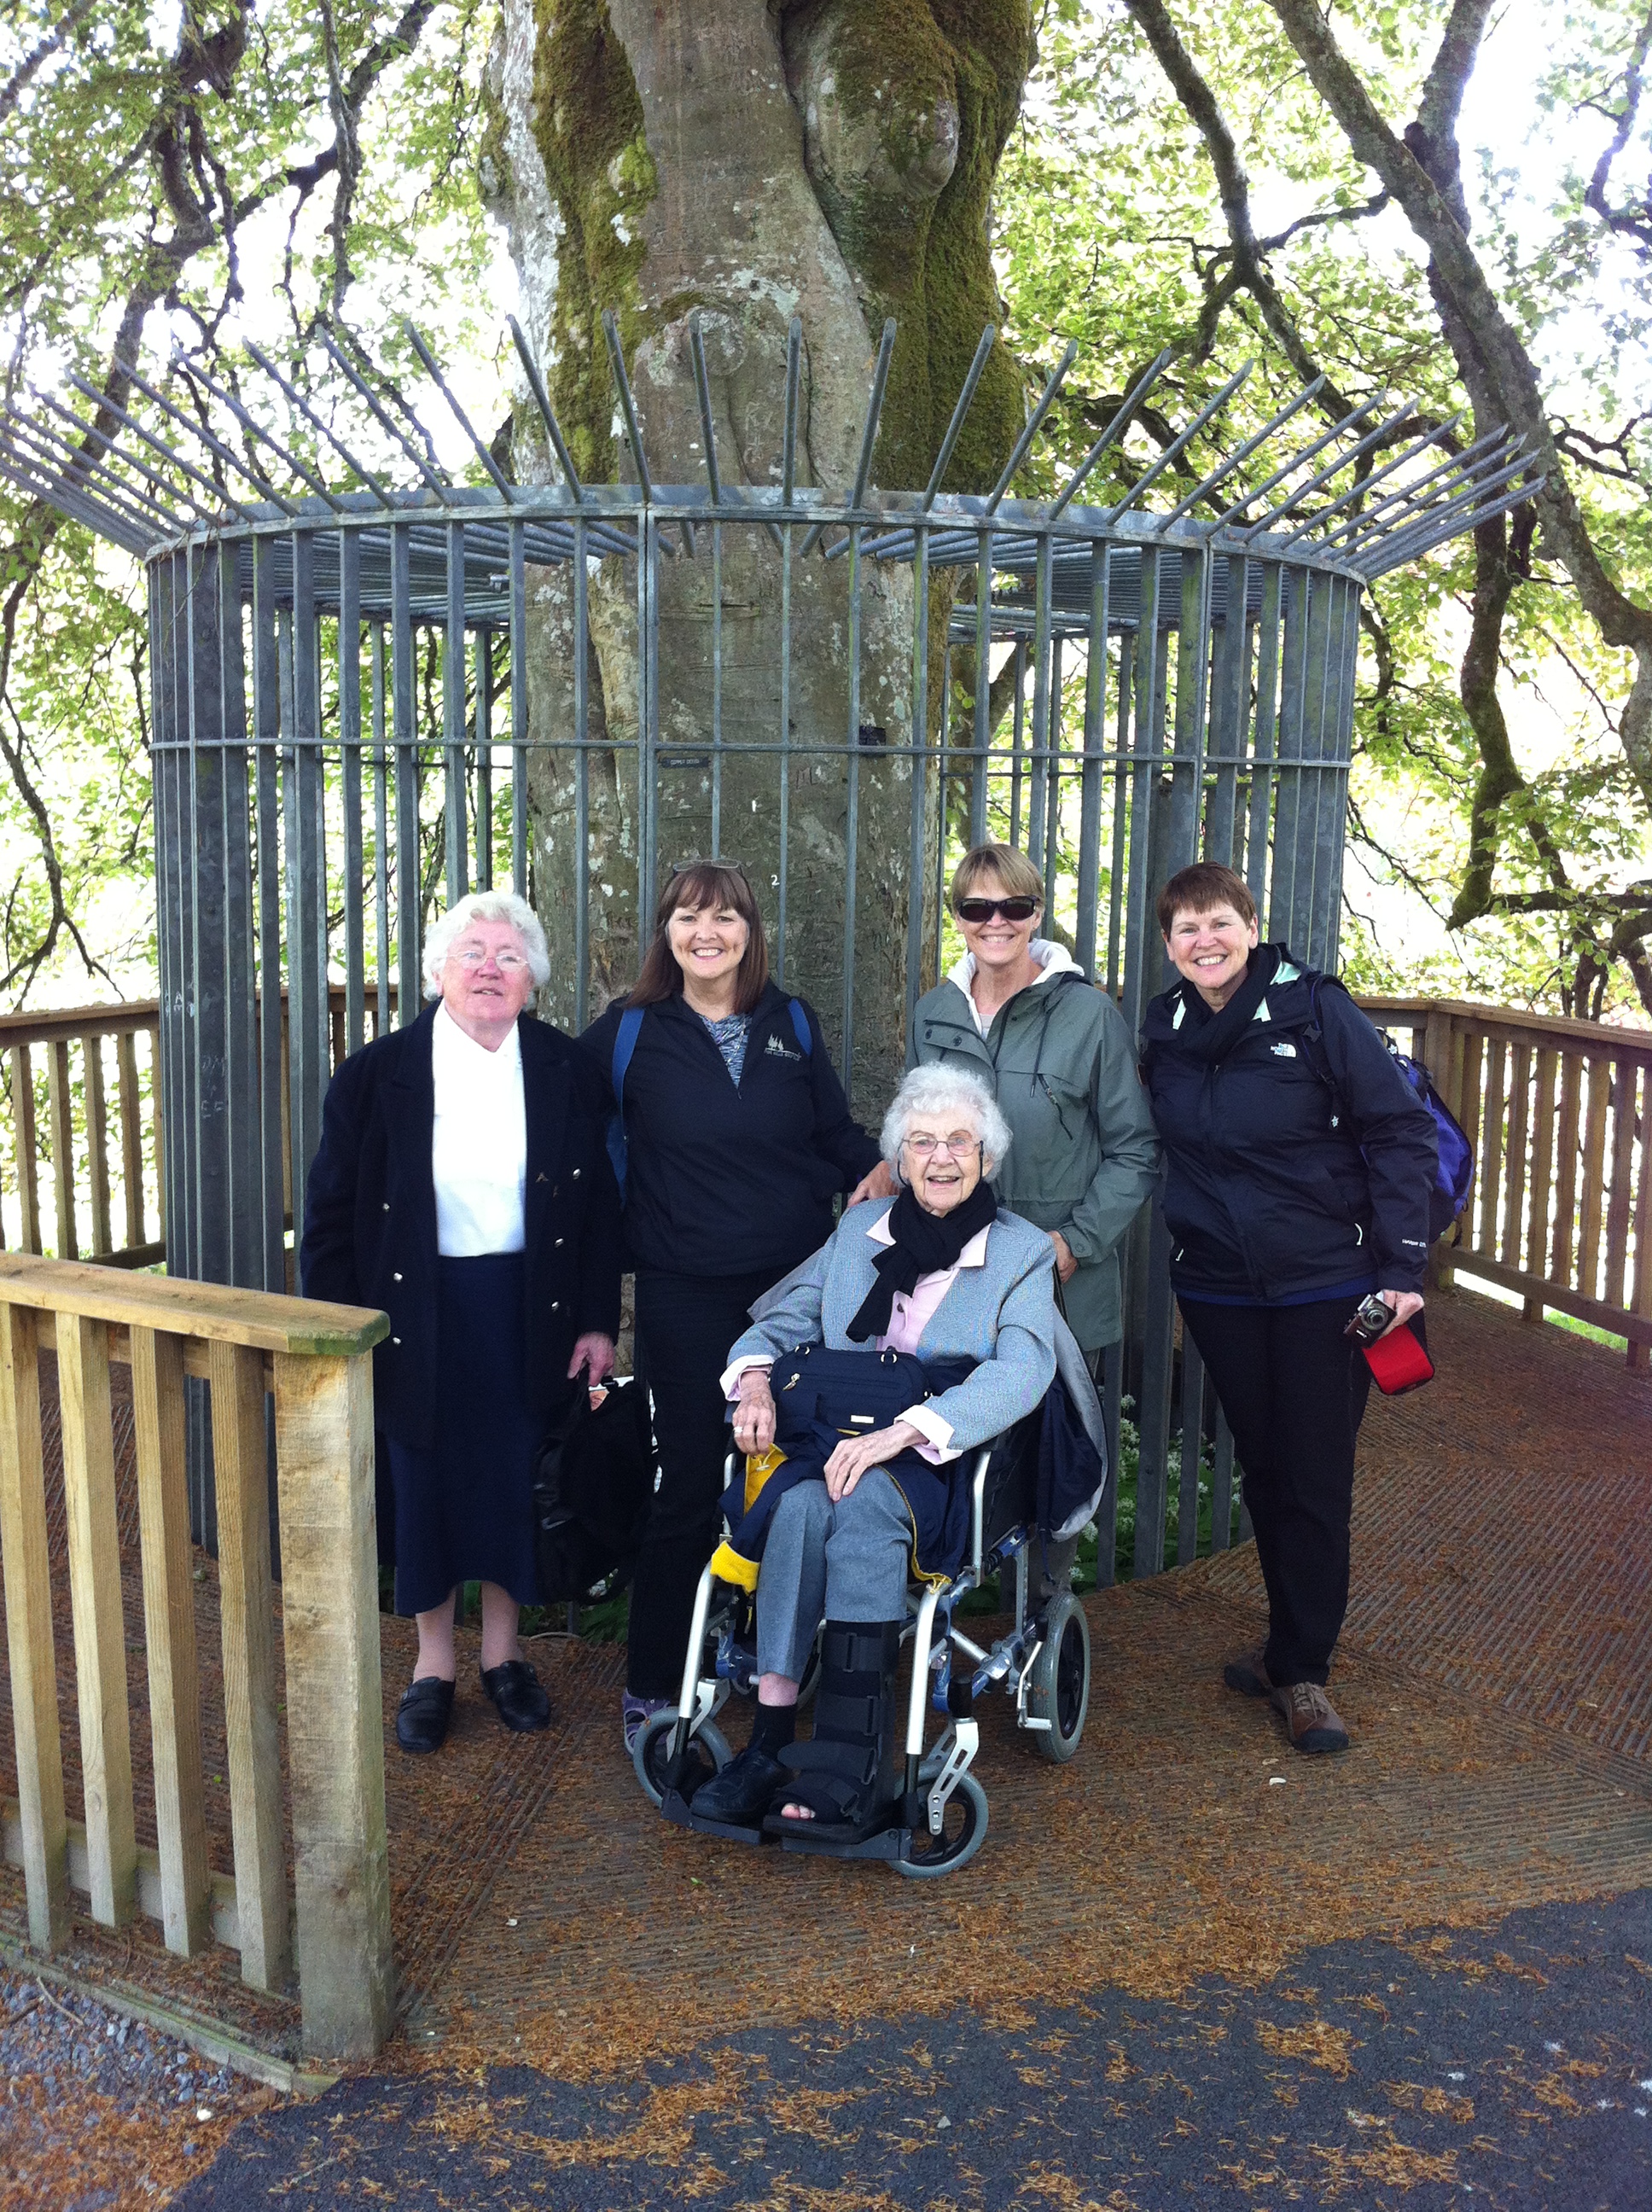 Sister DeLoudes Fahy, Martha Clark, Sara Burrus, Molly Daniel and Roberta Clark (in front) at the Autograph Tree in Coole Park. Photo by Annis Householder.